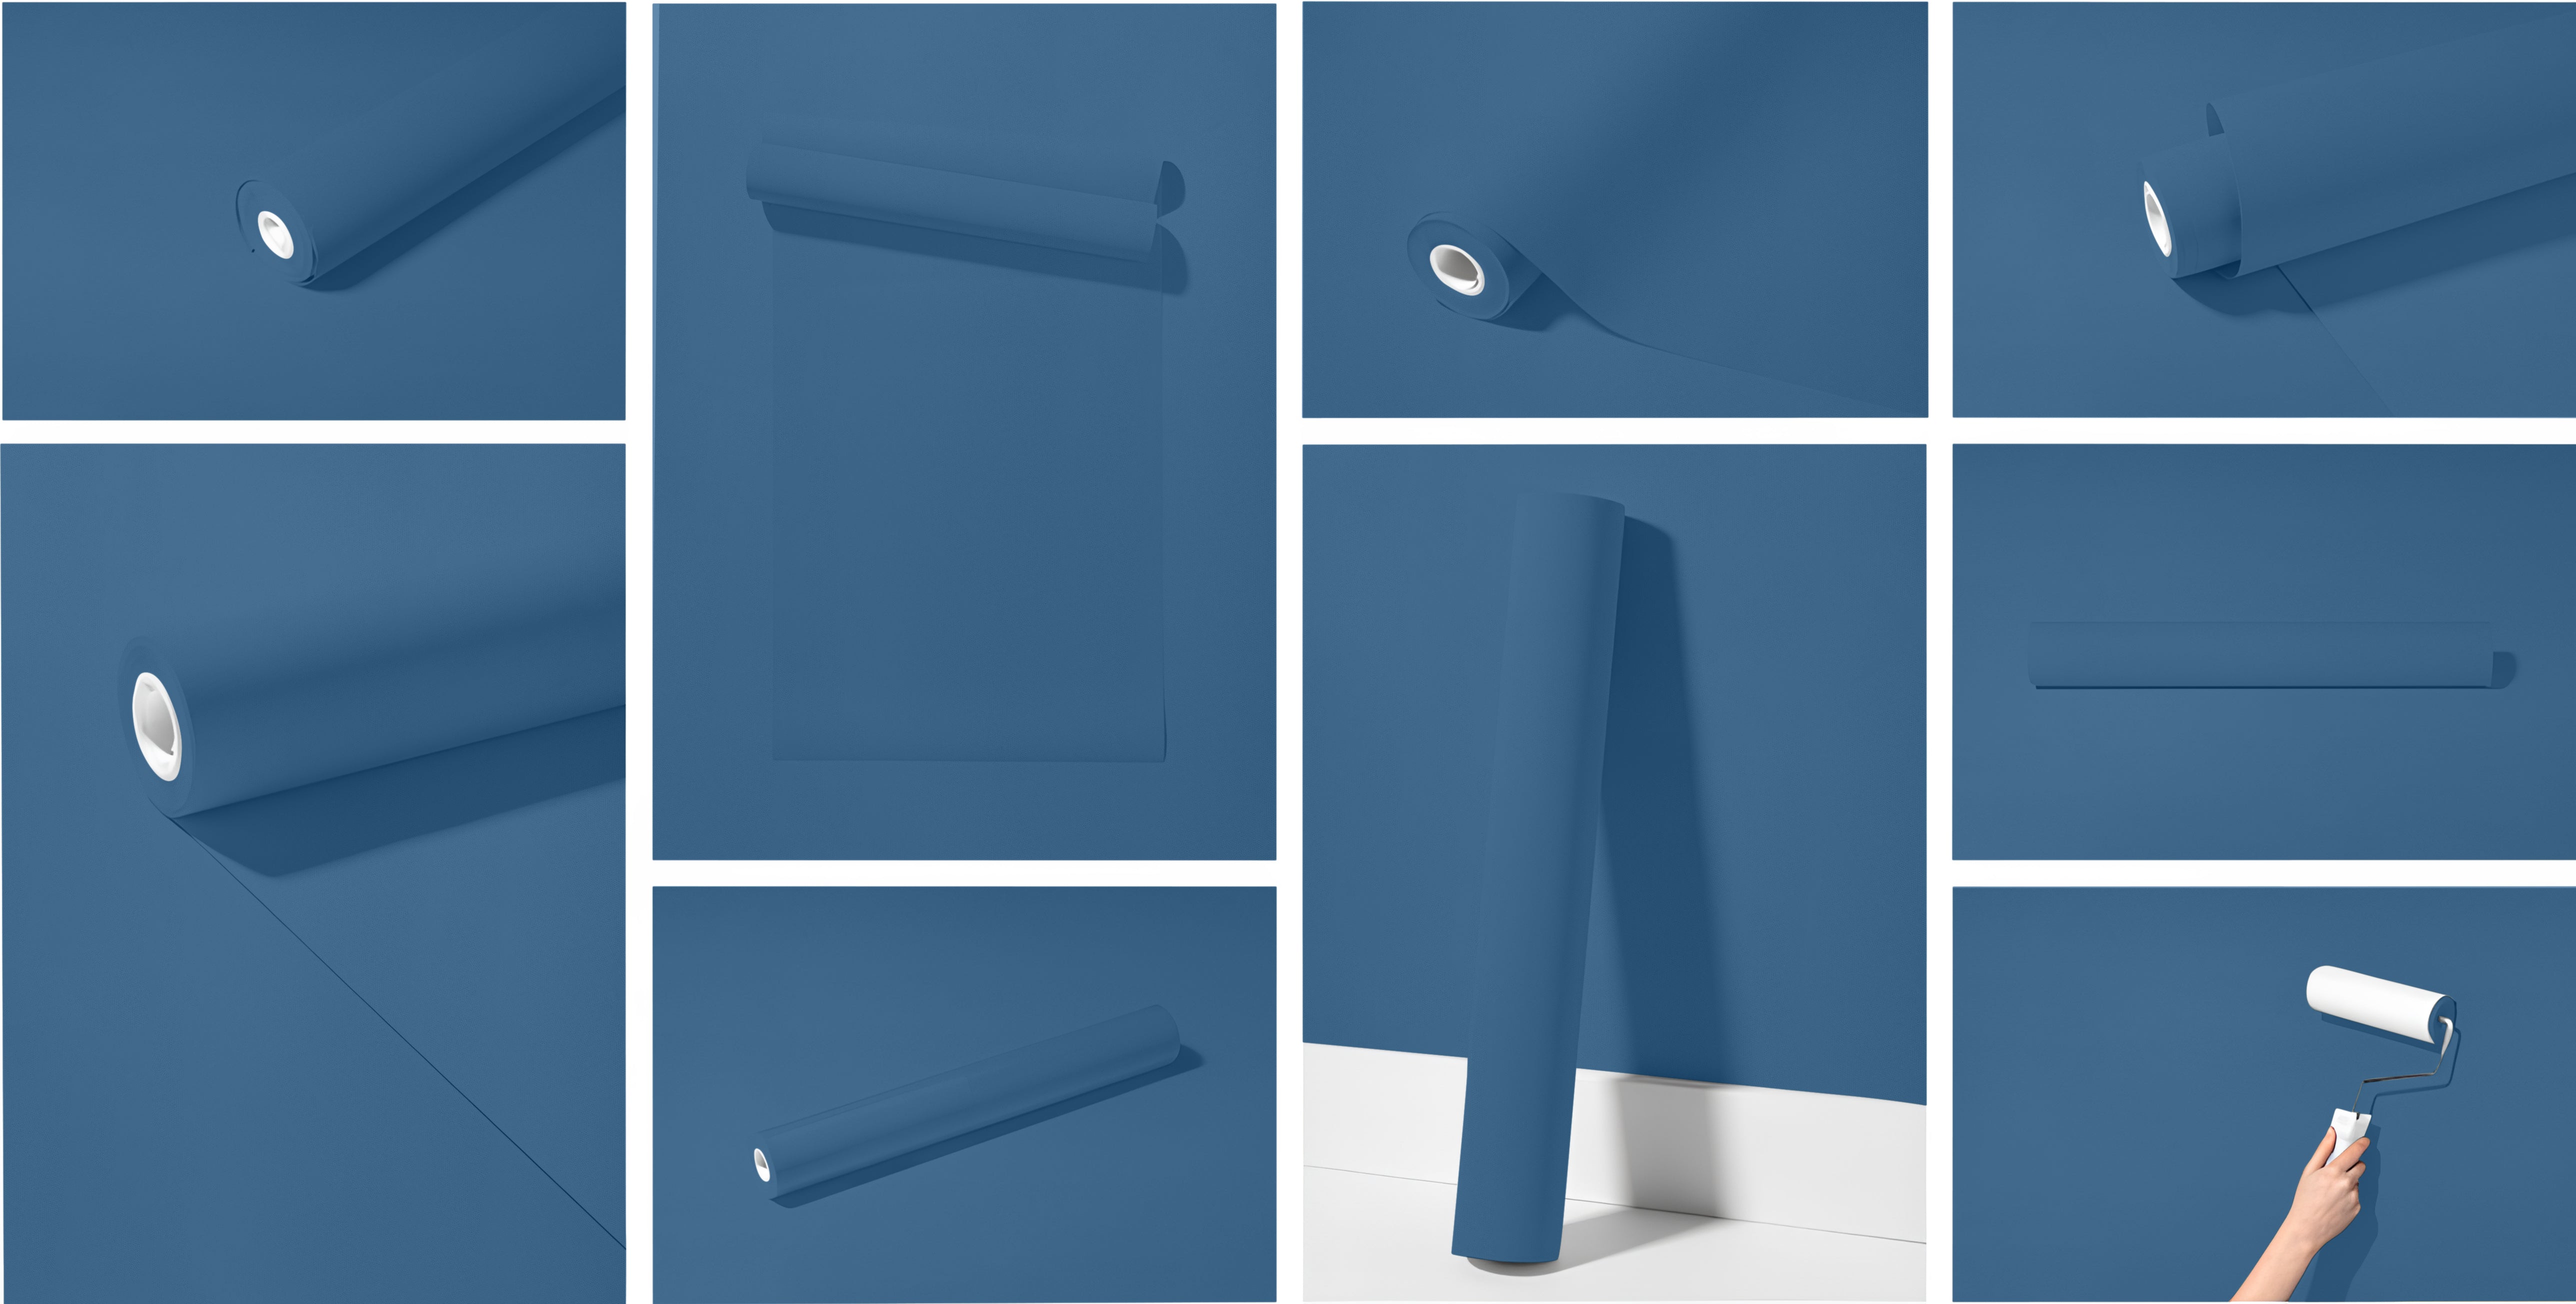 Peel & Stick Removable Re-usable Paint - Color RAL 5023 Distant Blue - offRAL™ - RALRAW LLC, USA